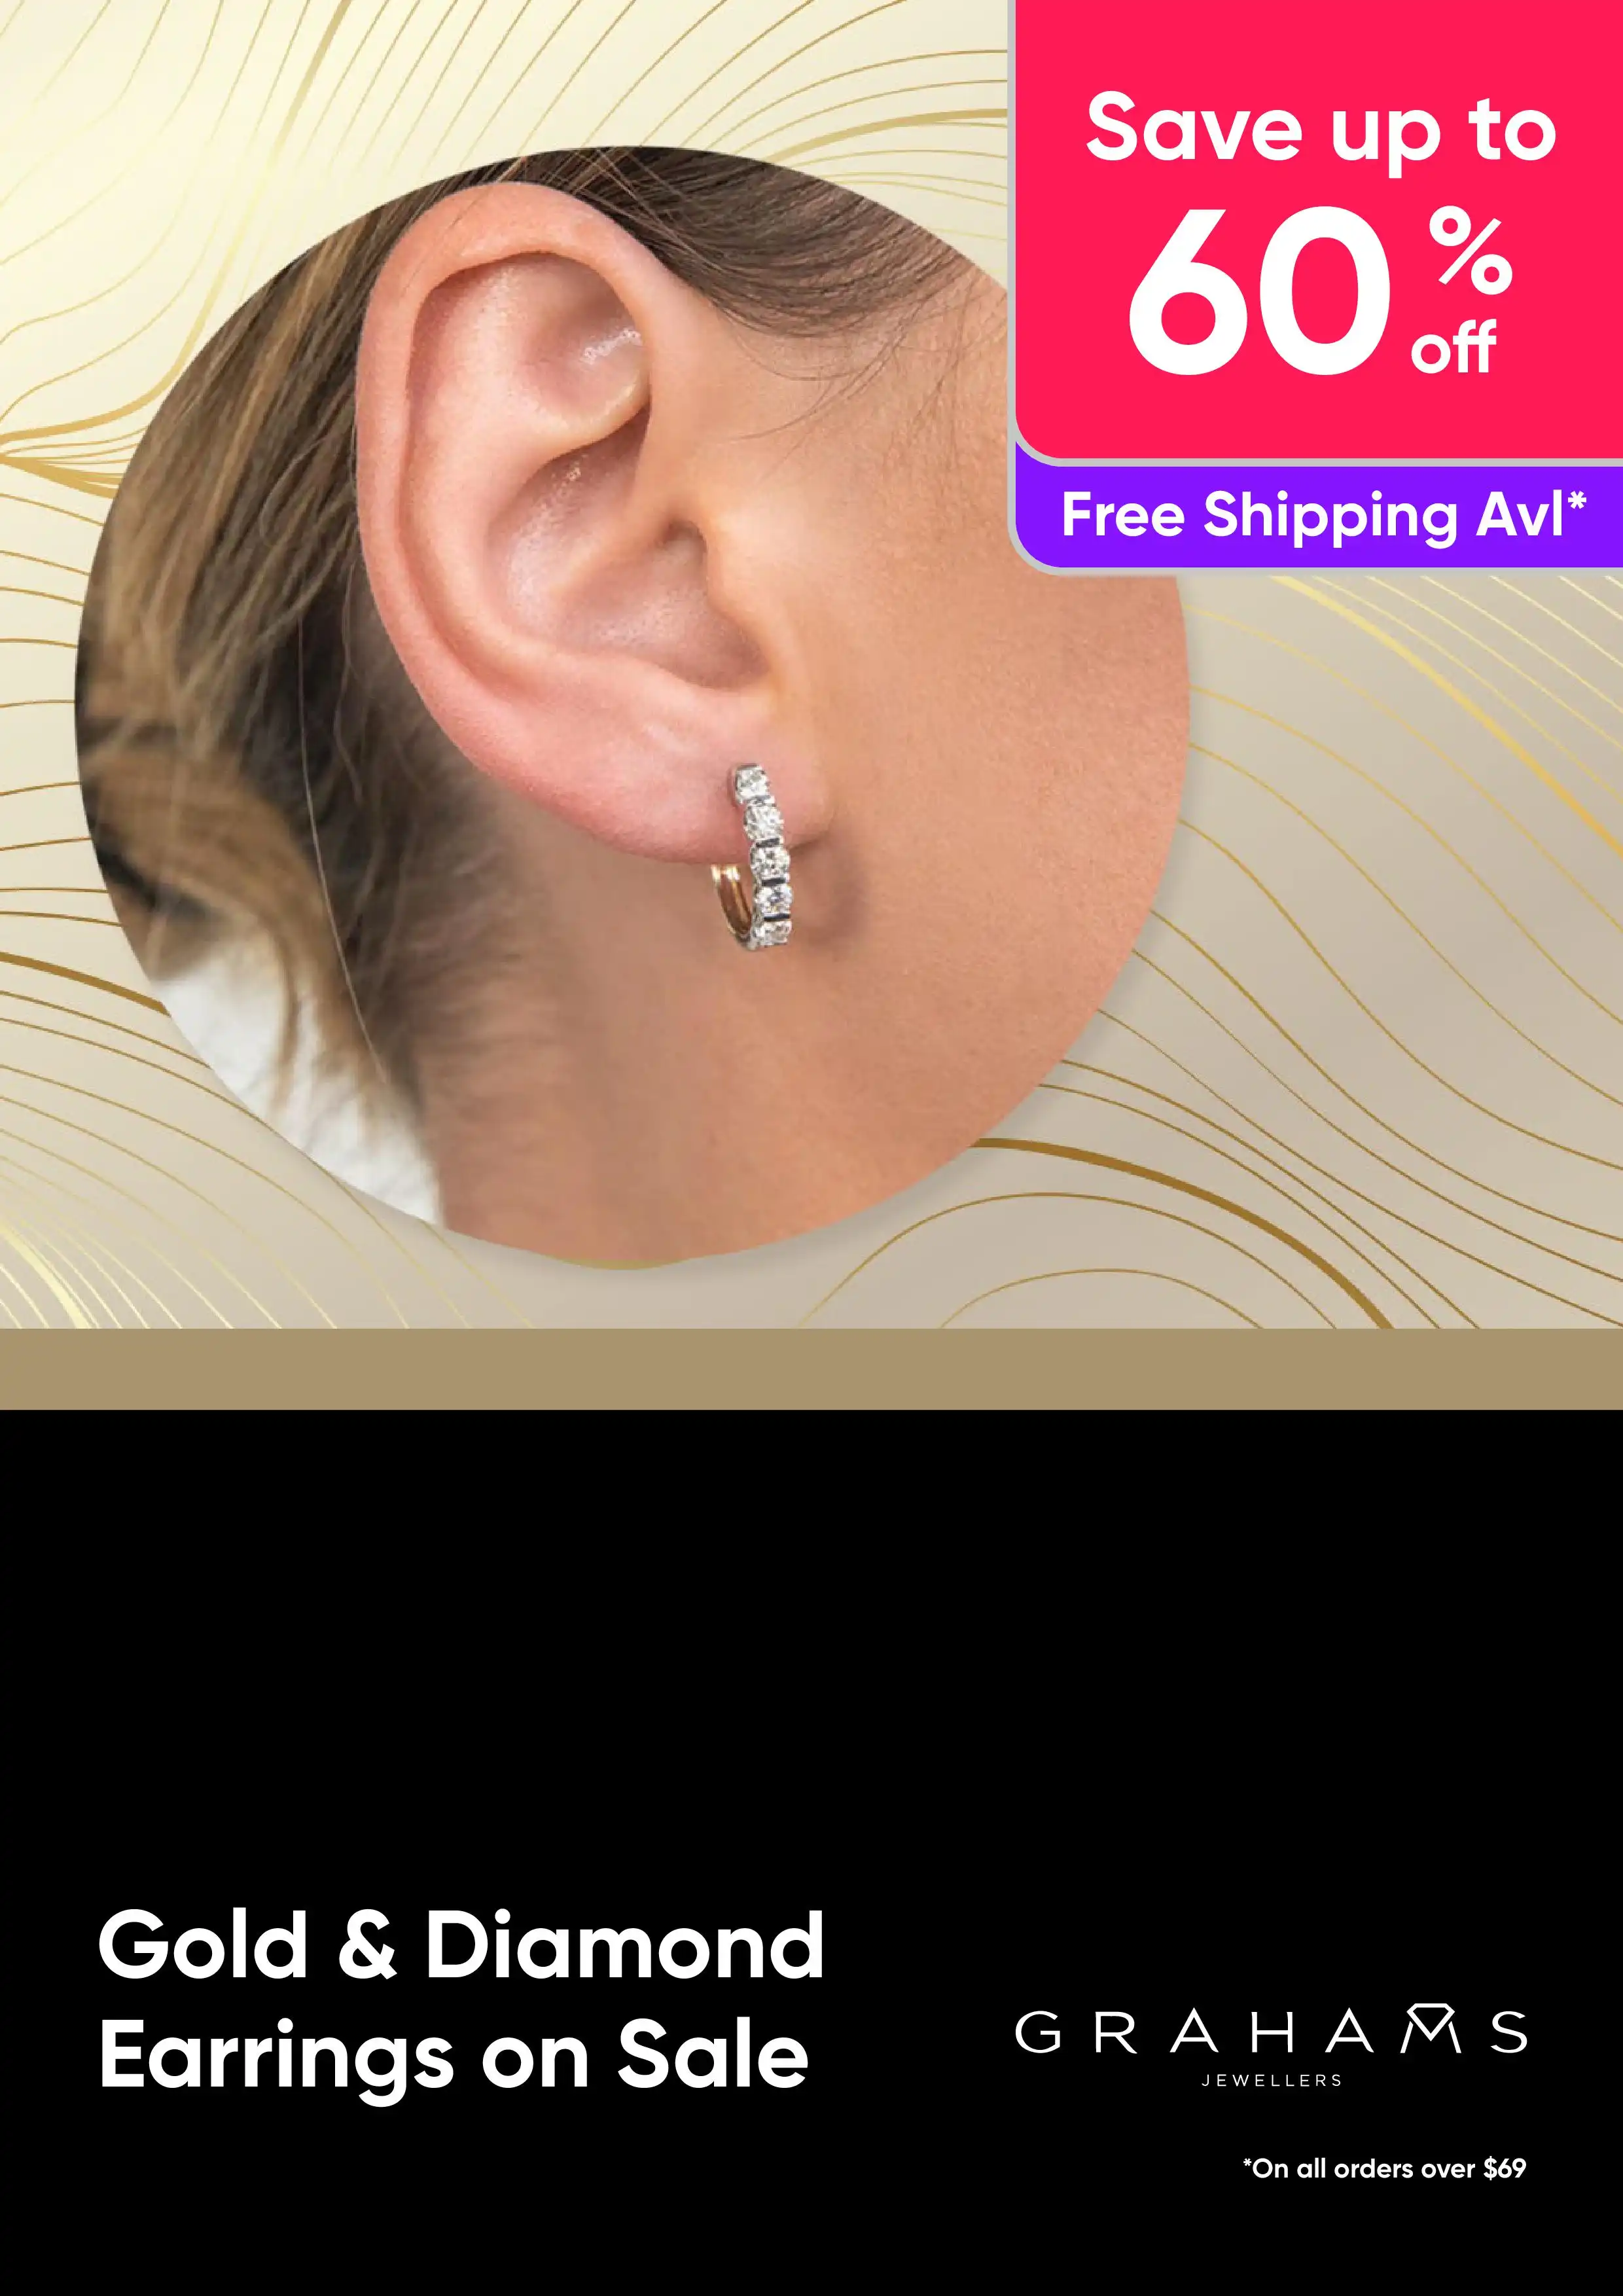 Gold and Diamond Earrings on Sale - Save Up to 60% Off